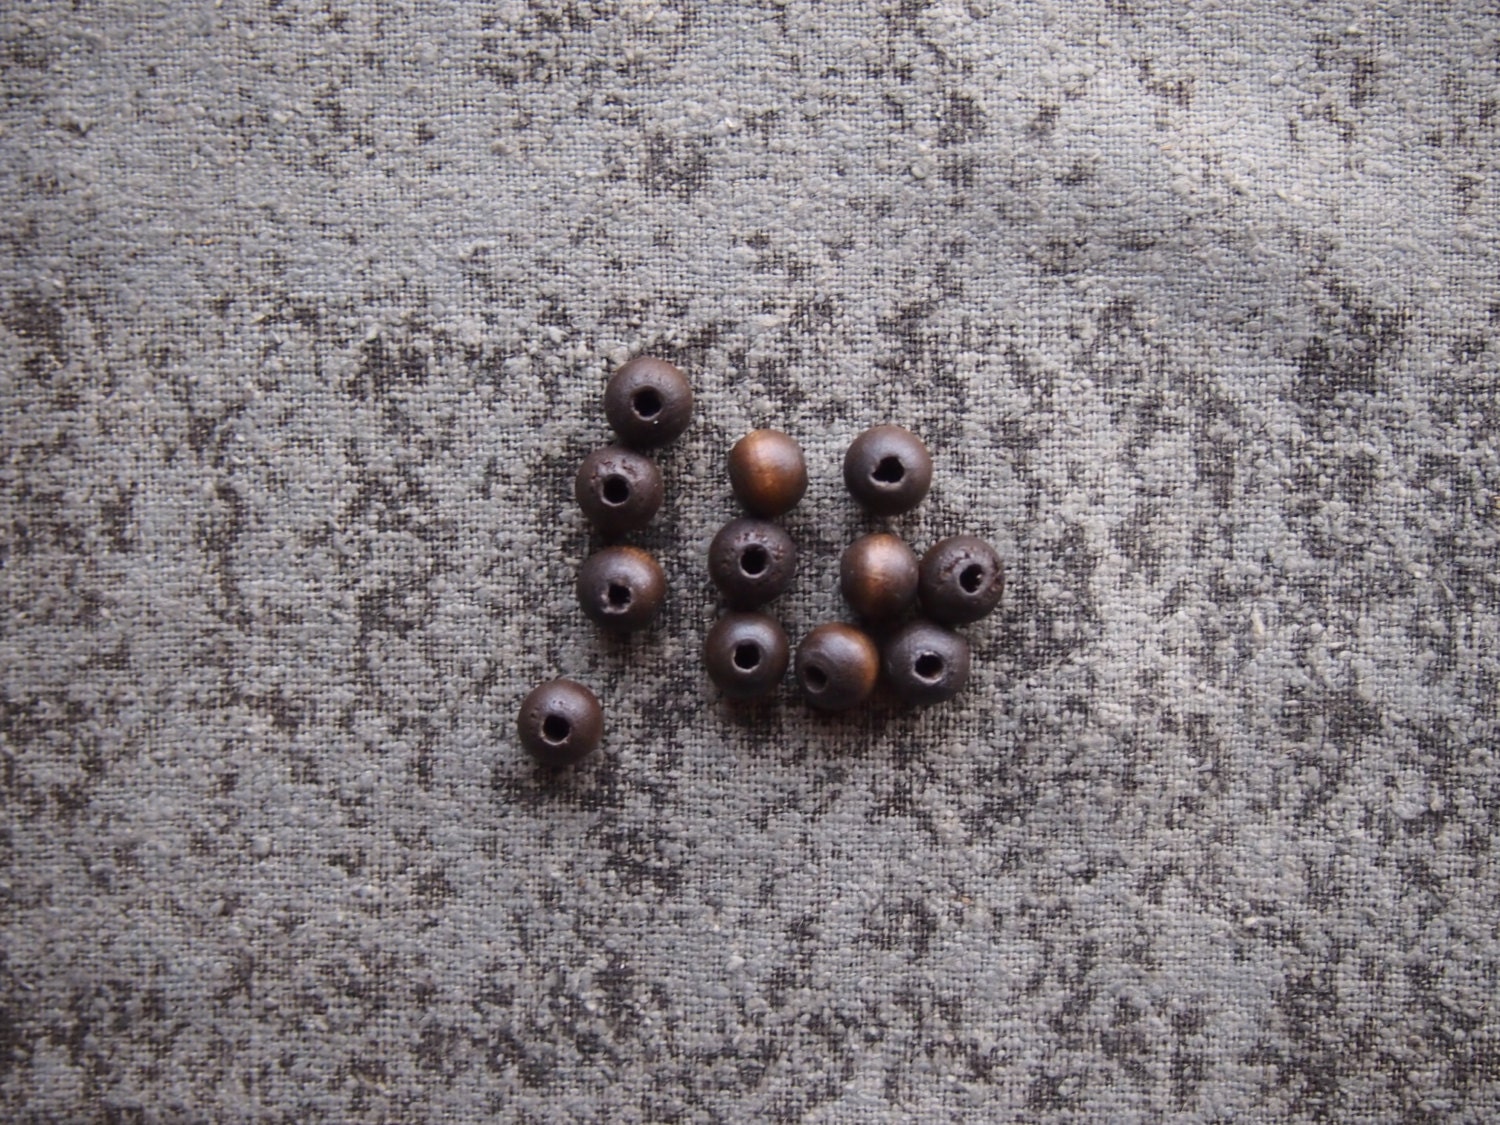 Wooden beads small round set of 12 reclaimed wood brown craft supplies - Octavi